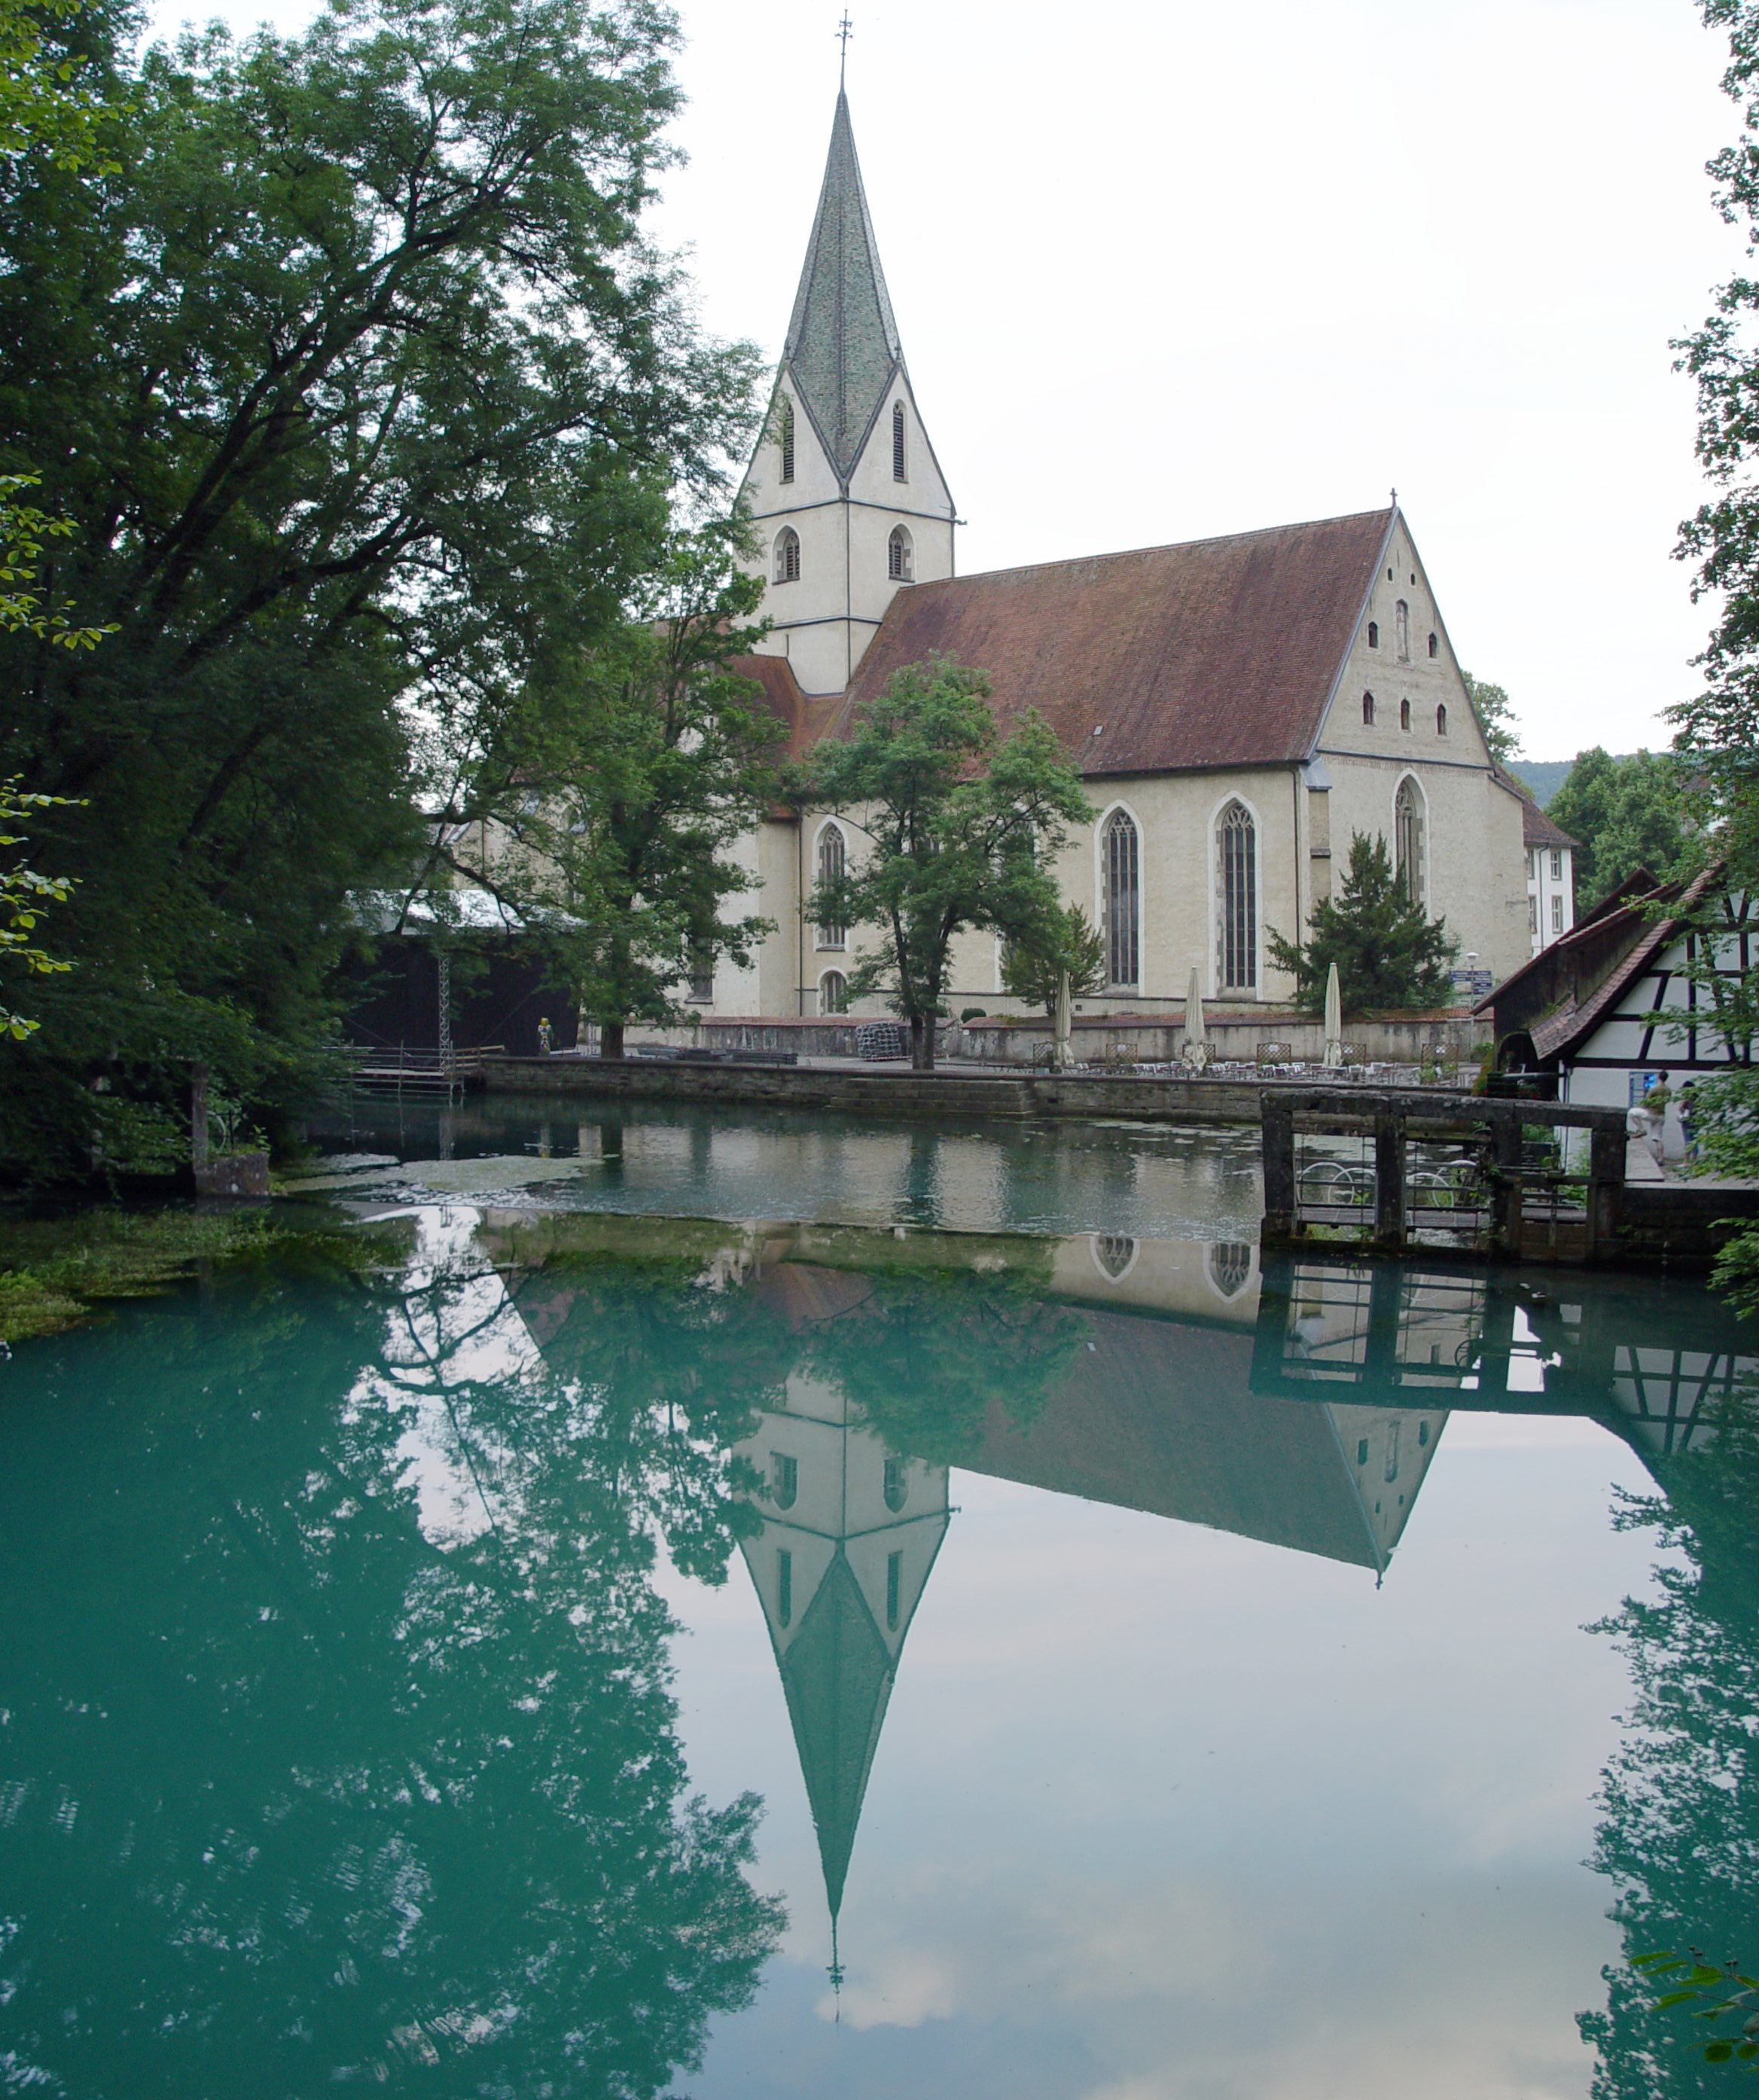 View of karstic spring Blautopf and monastery church in the background